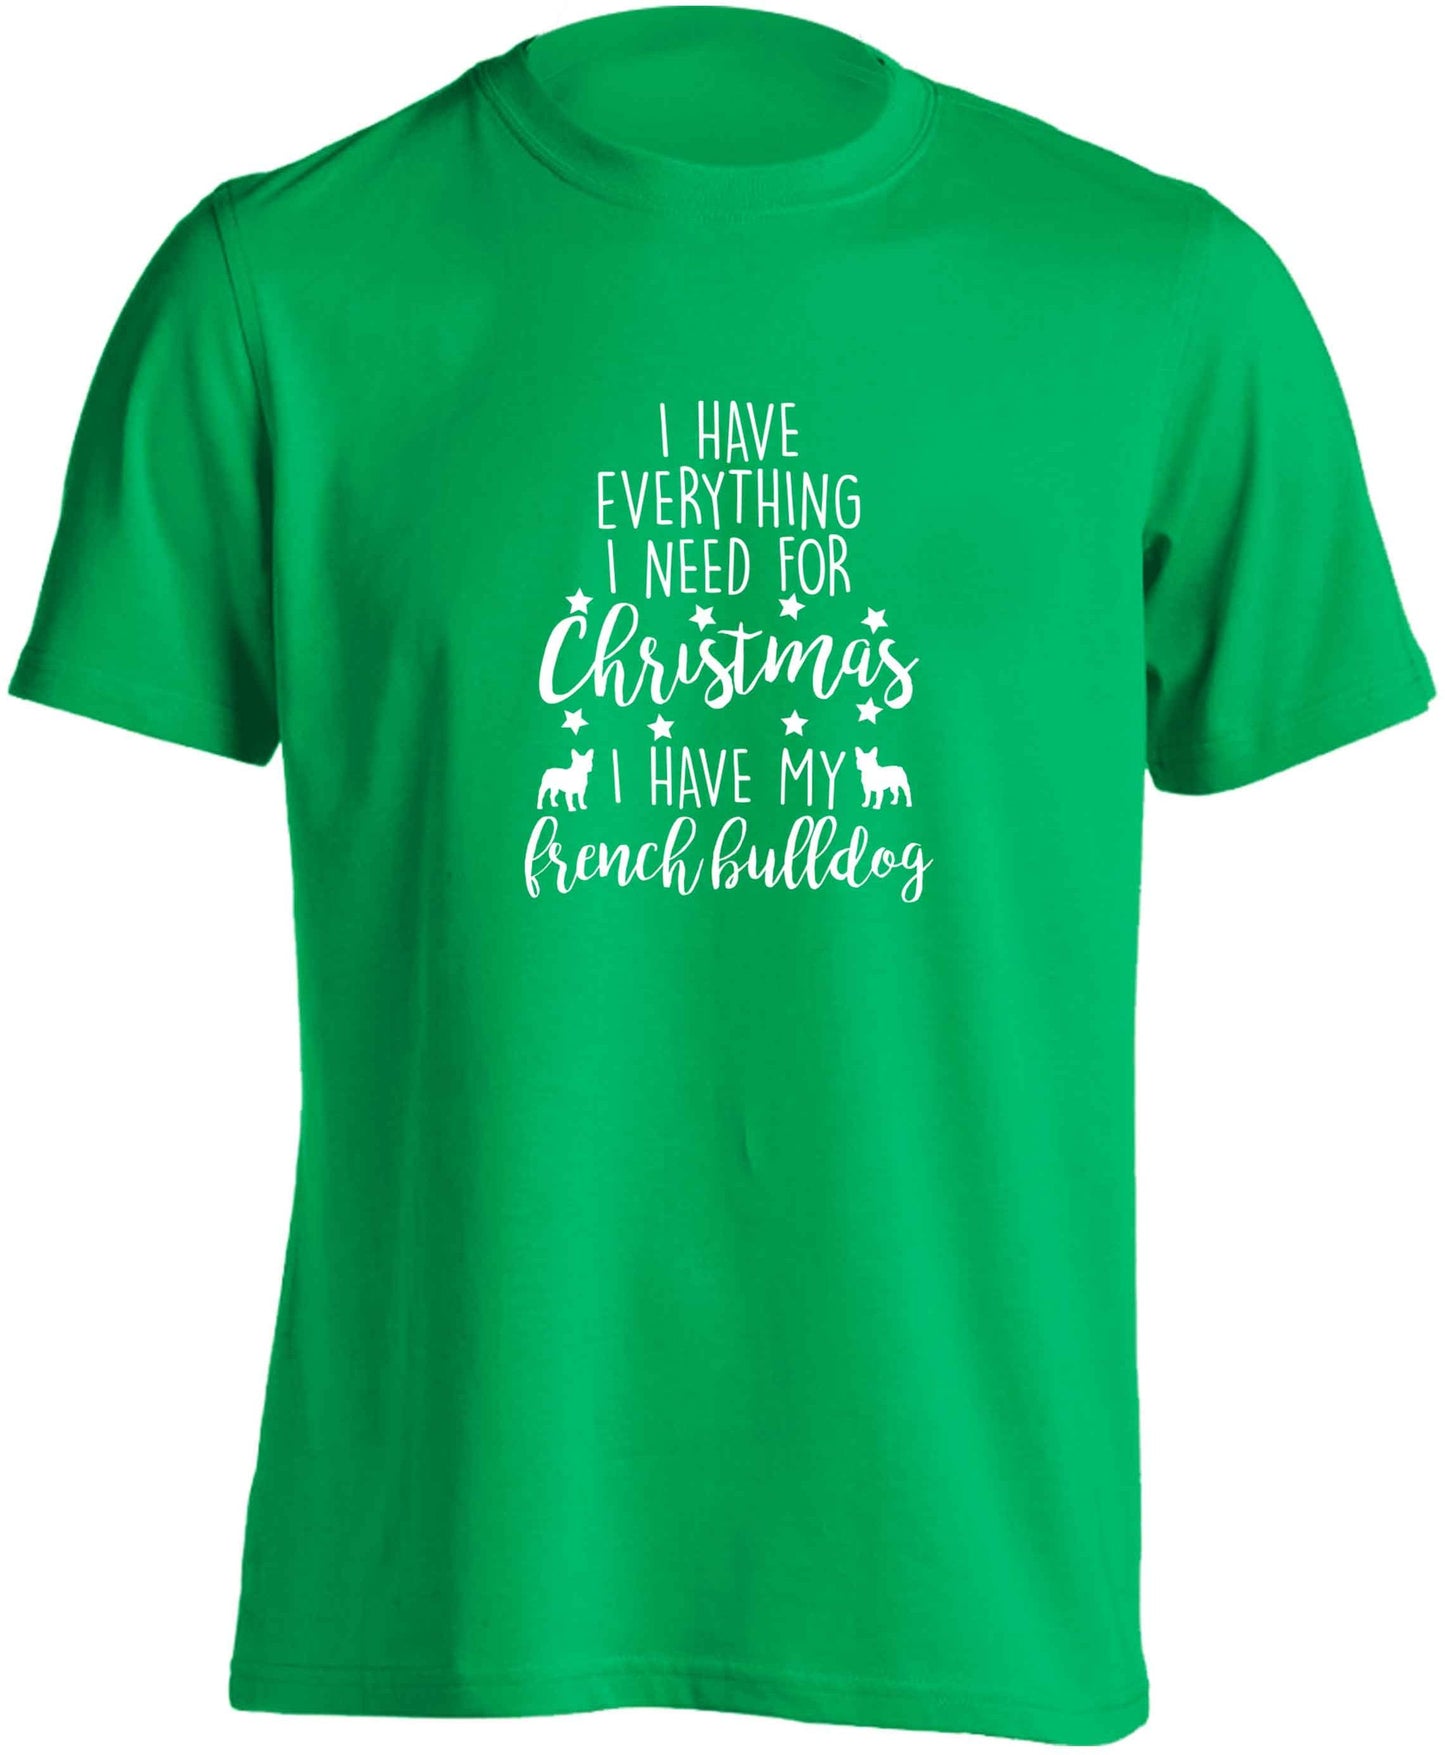 I have everything I need for Christmas I have my french bulldog adults unisex green Tshirt 2XL